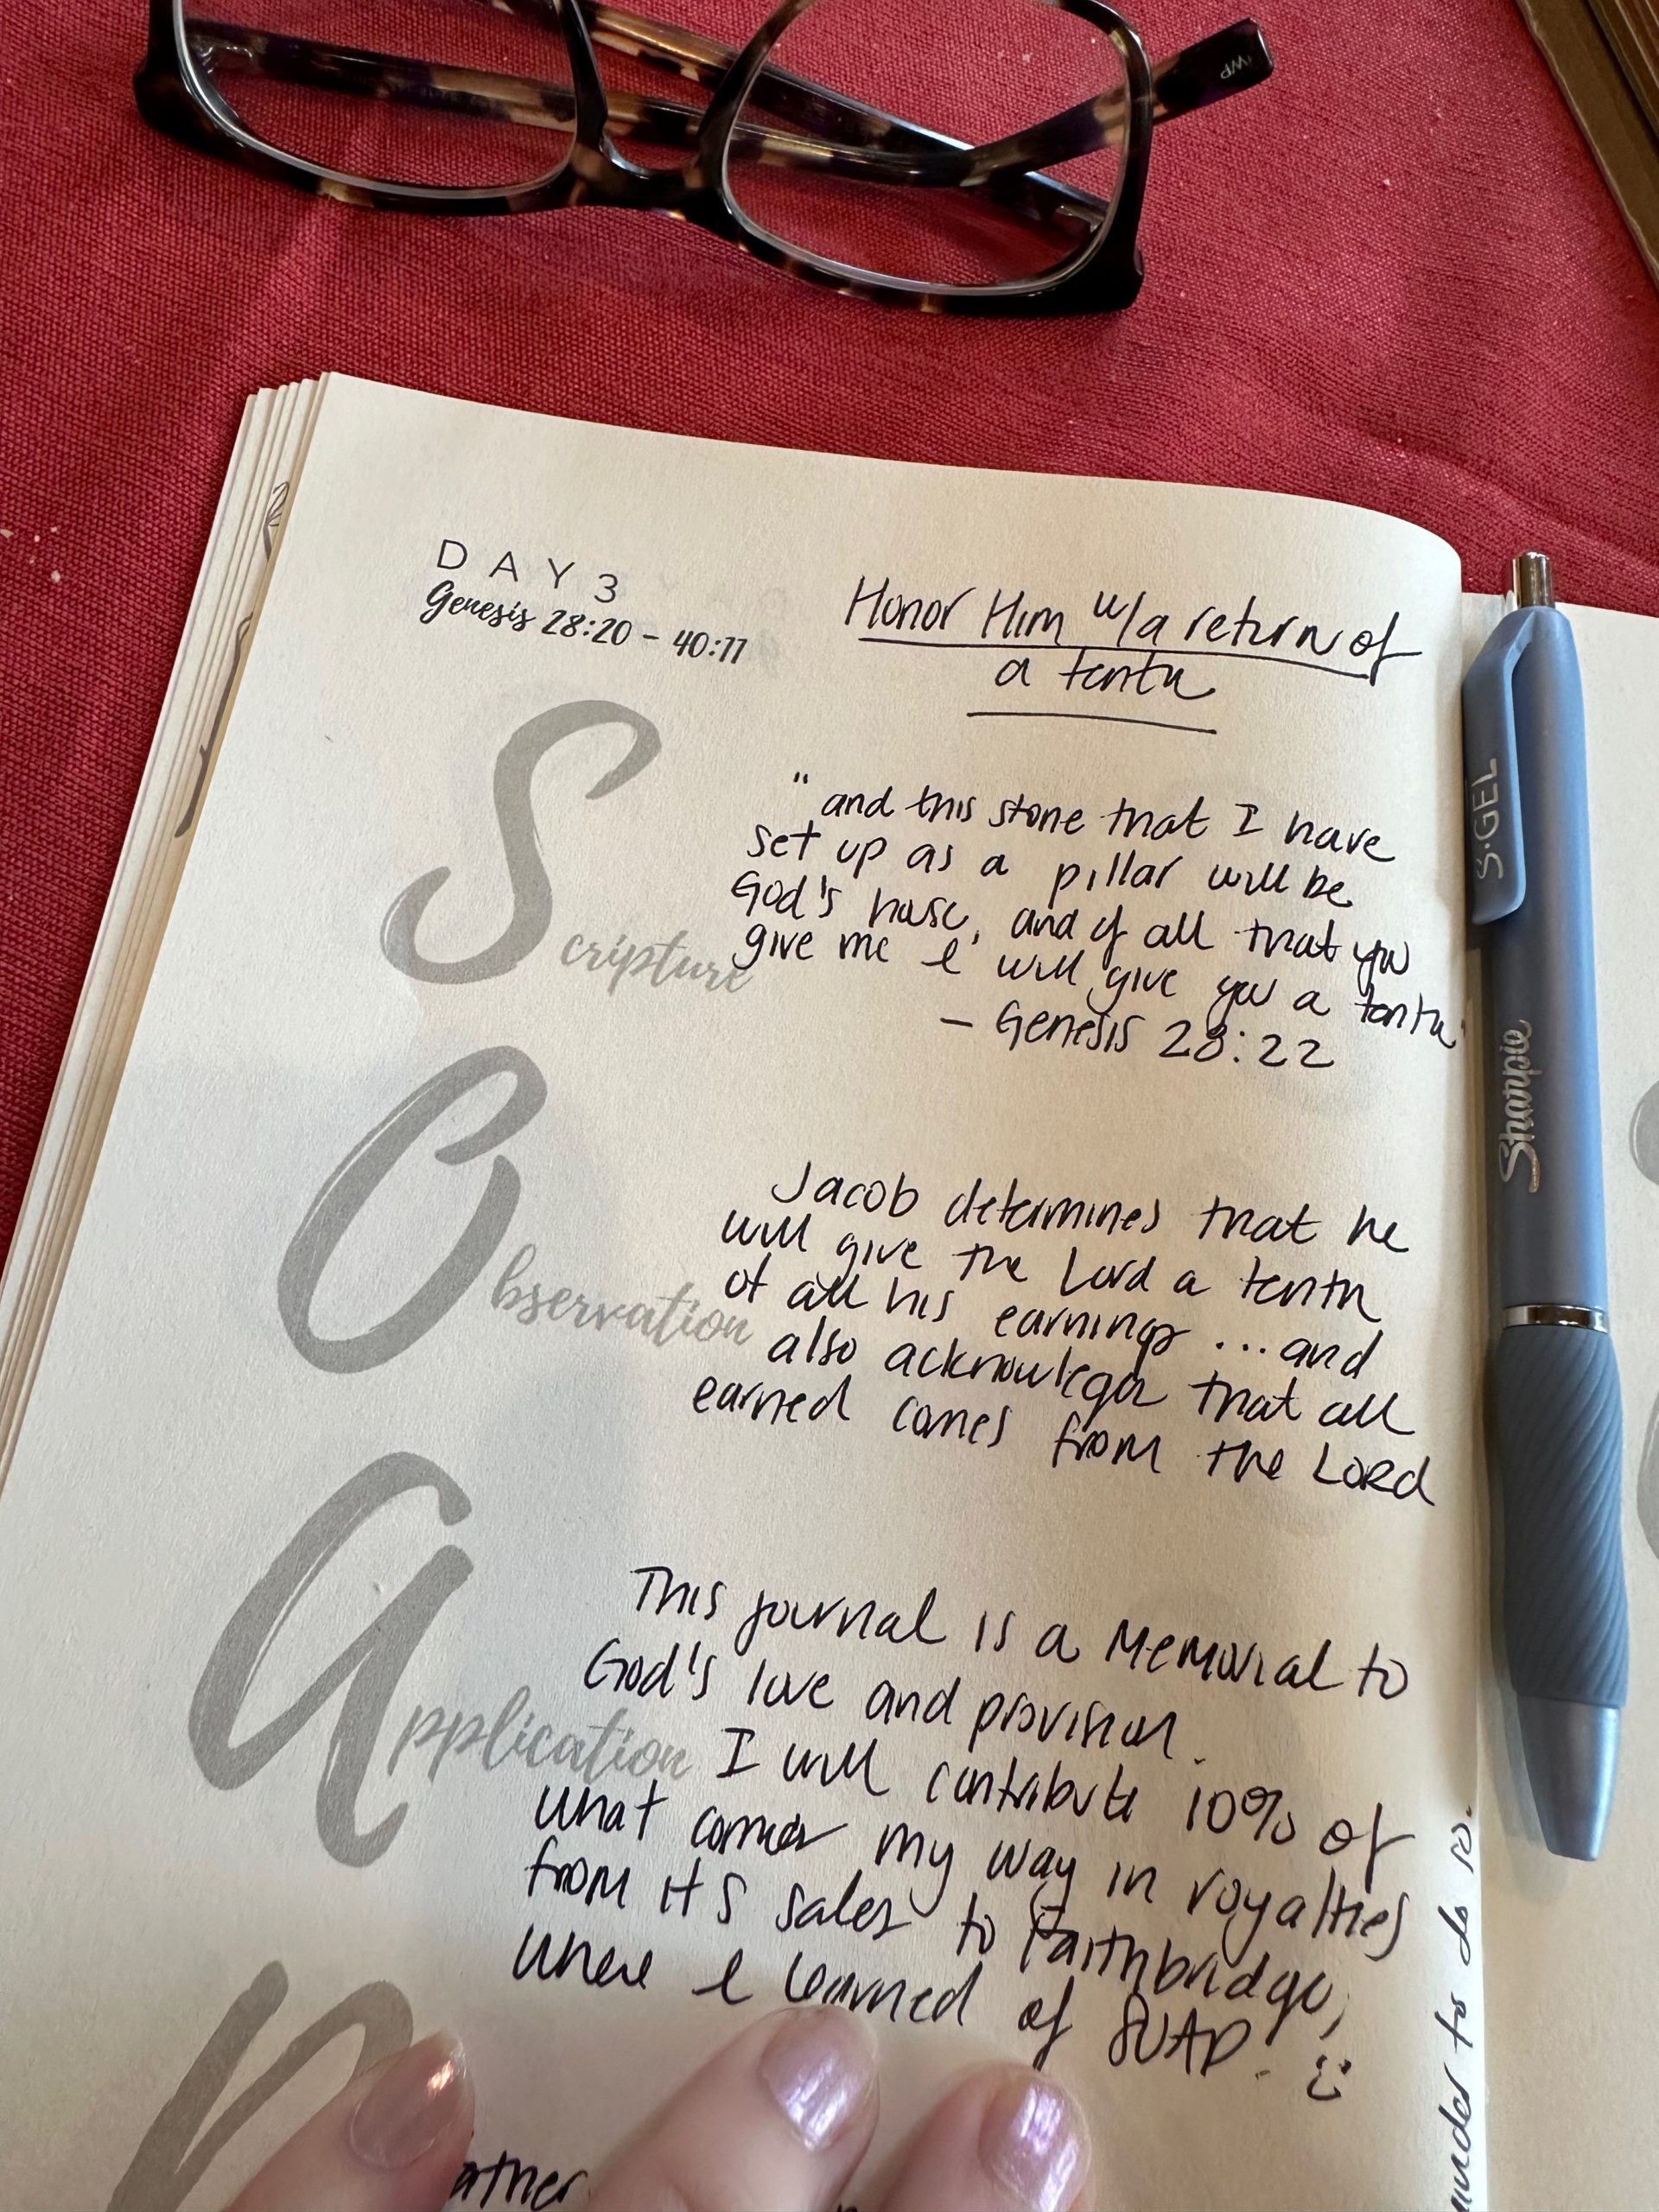 Journaling through the Bible in 90 days: Day 3